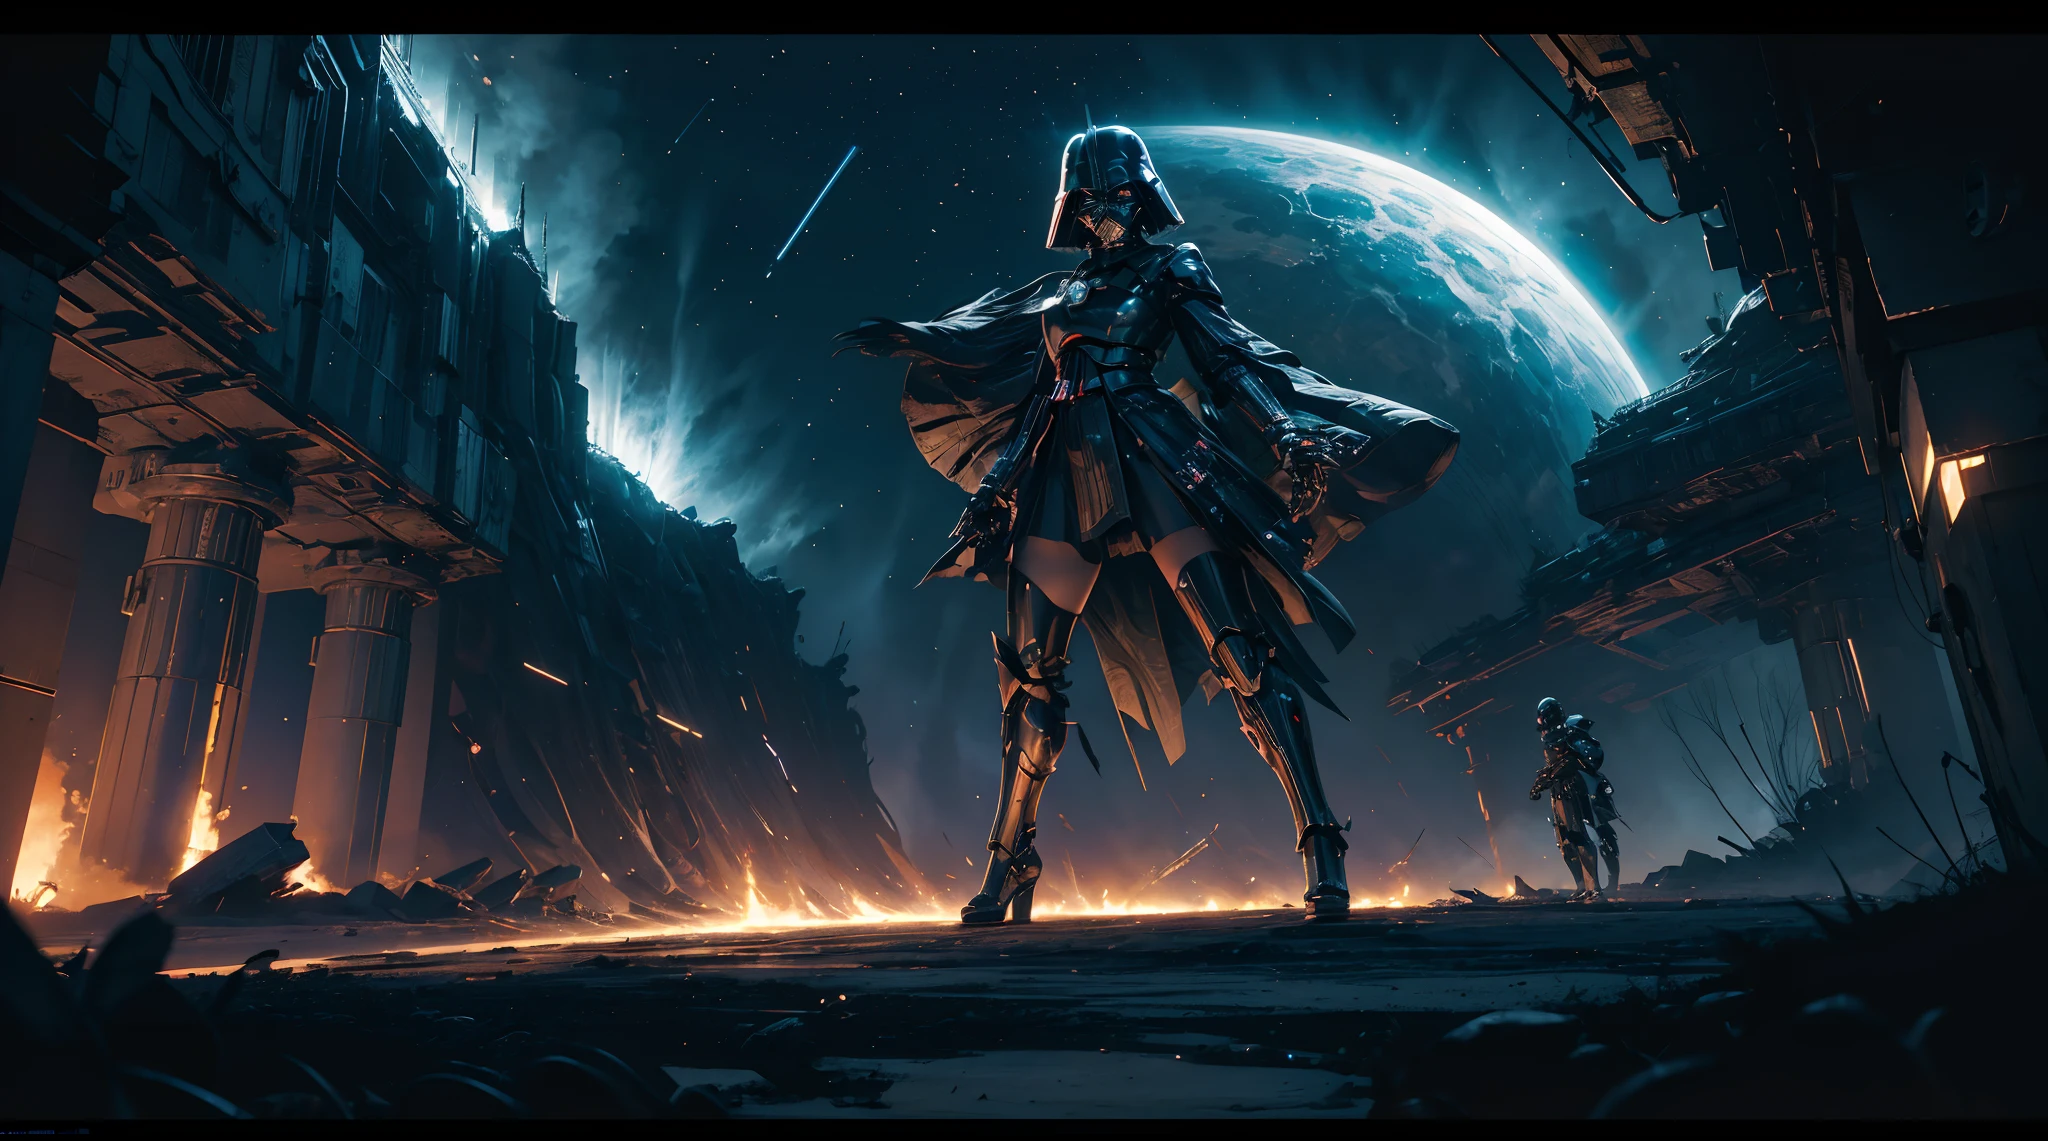 (masterpiece, high resolution, illustration:1.3), the extraordinary fusion of Darth Vader and 2B, (sleek cybernetics:1.2), iconic helmet with a feminine touch, (mystical lightsaber katana:1.1), intergalactic backdrop, stars and galaxies, (battle against androids:1.4), cosmic energy clashes, celestial battlefield, dramatic space opera, futuristic intensity, powerful emotions, cosmic duel, wide-angle view, galaxies colliding, epic encounter.